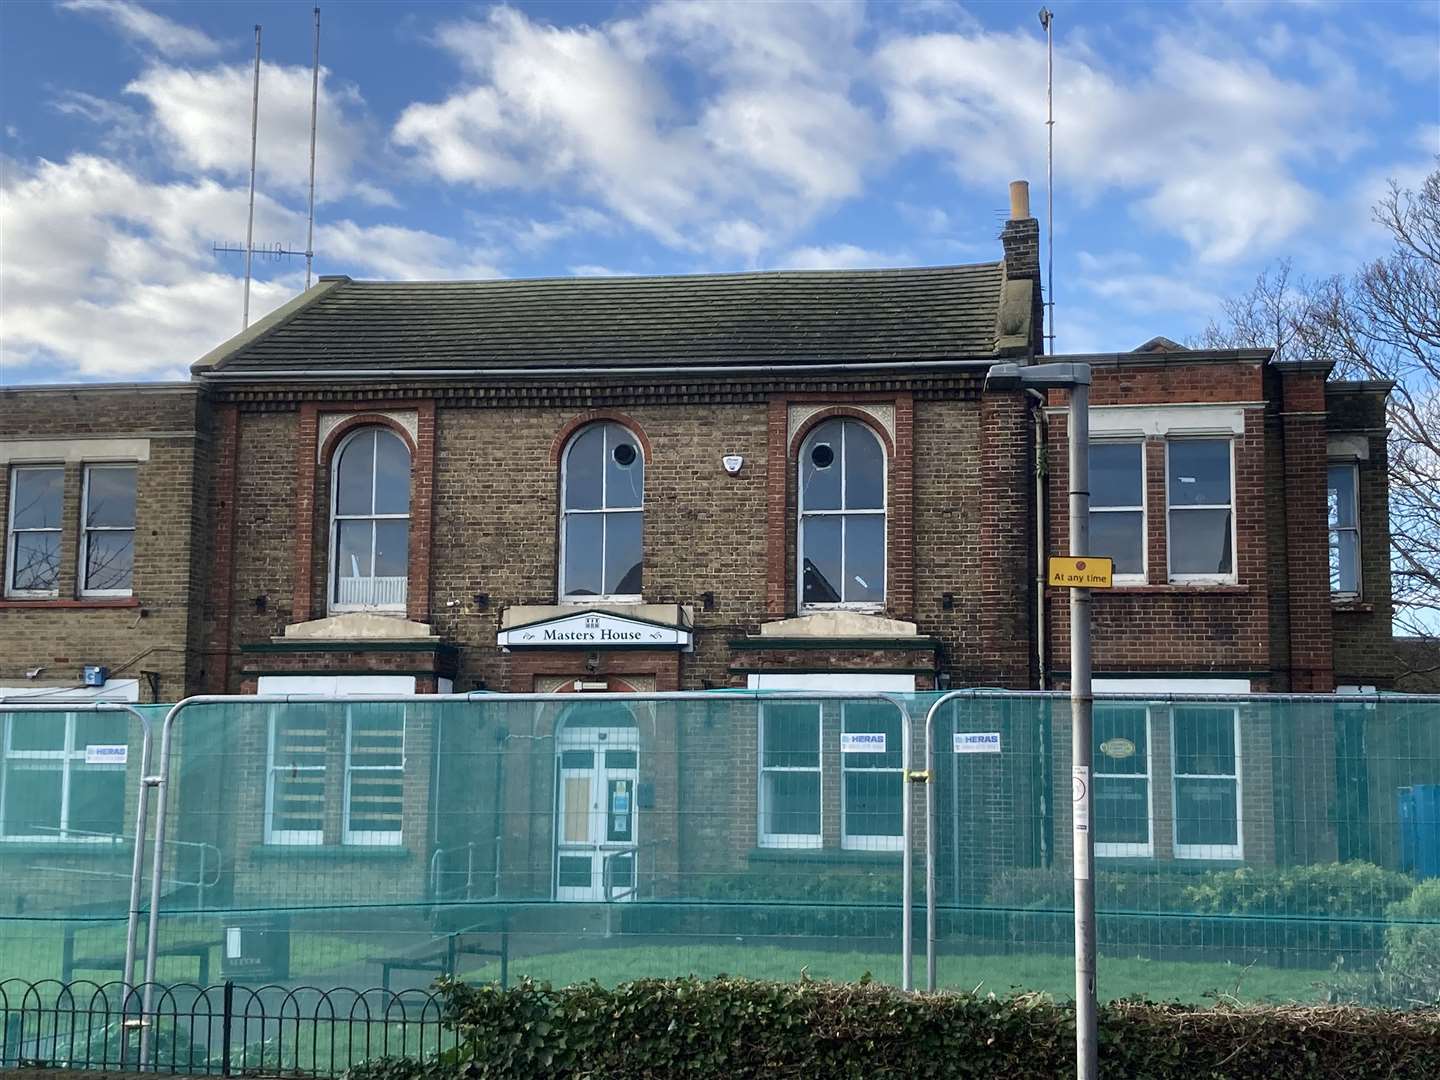 Renovation work is starting on Masters House in Trinity Road, Sheerness. Swale council is spending £1.3m to convert the former council offices into a community and business hub